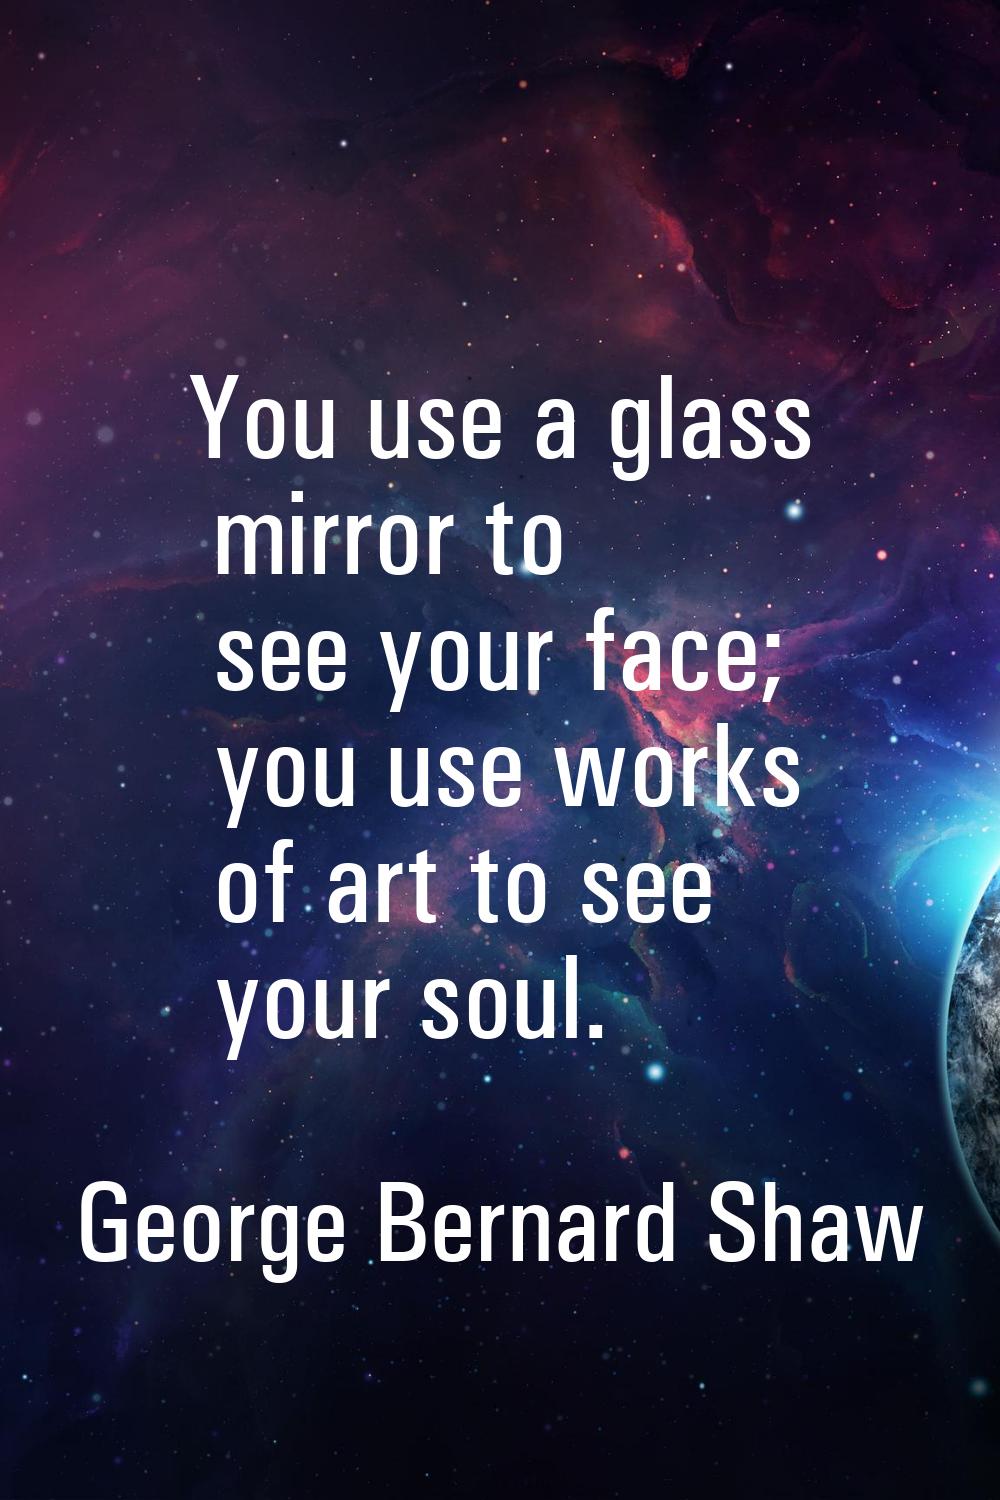 You use a glass mirror to see your face; you use works of art to see your soul.